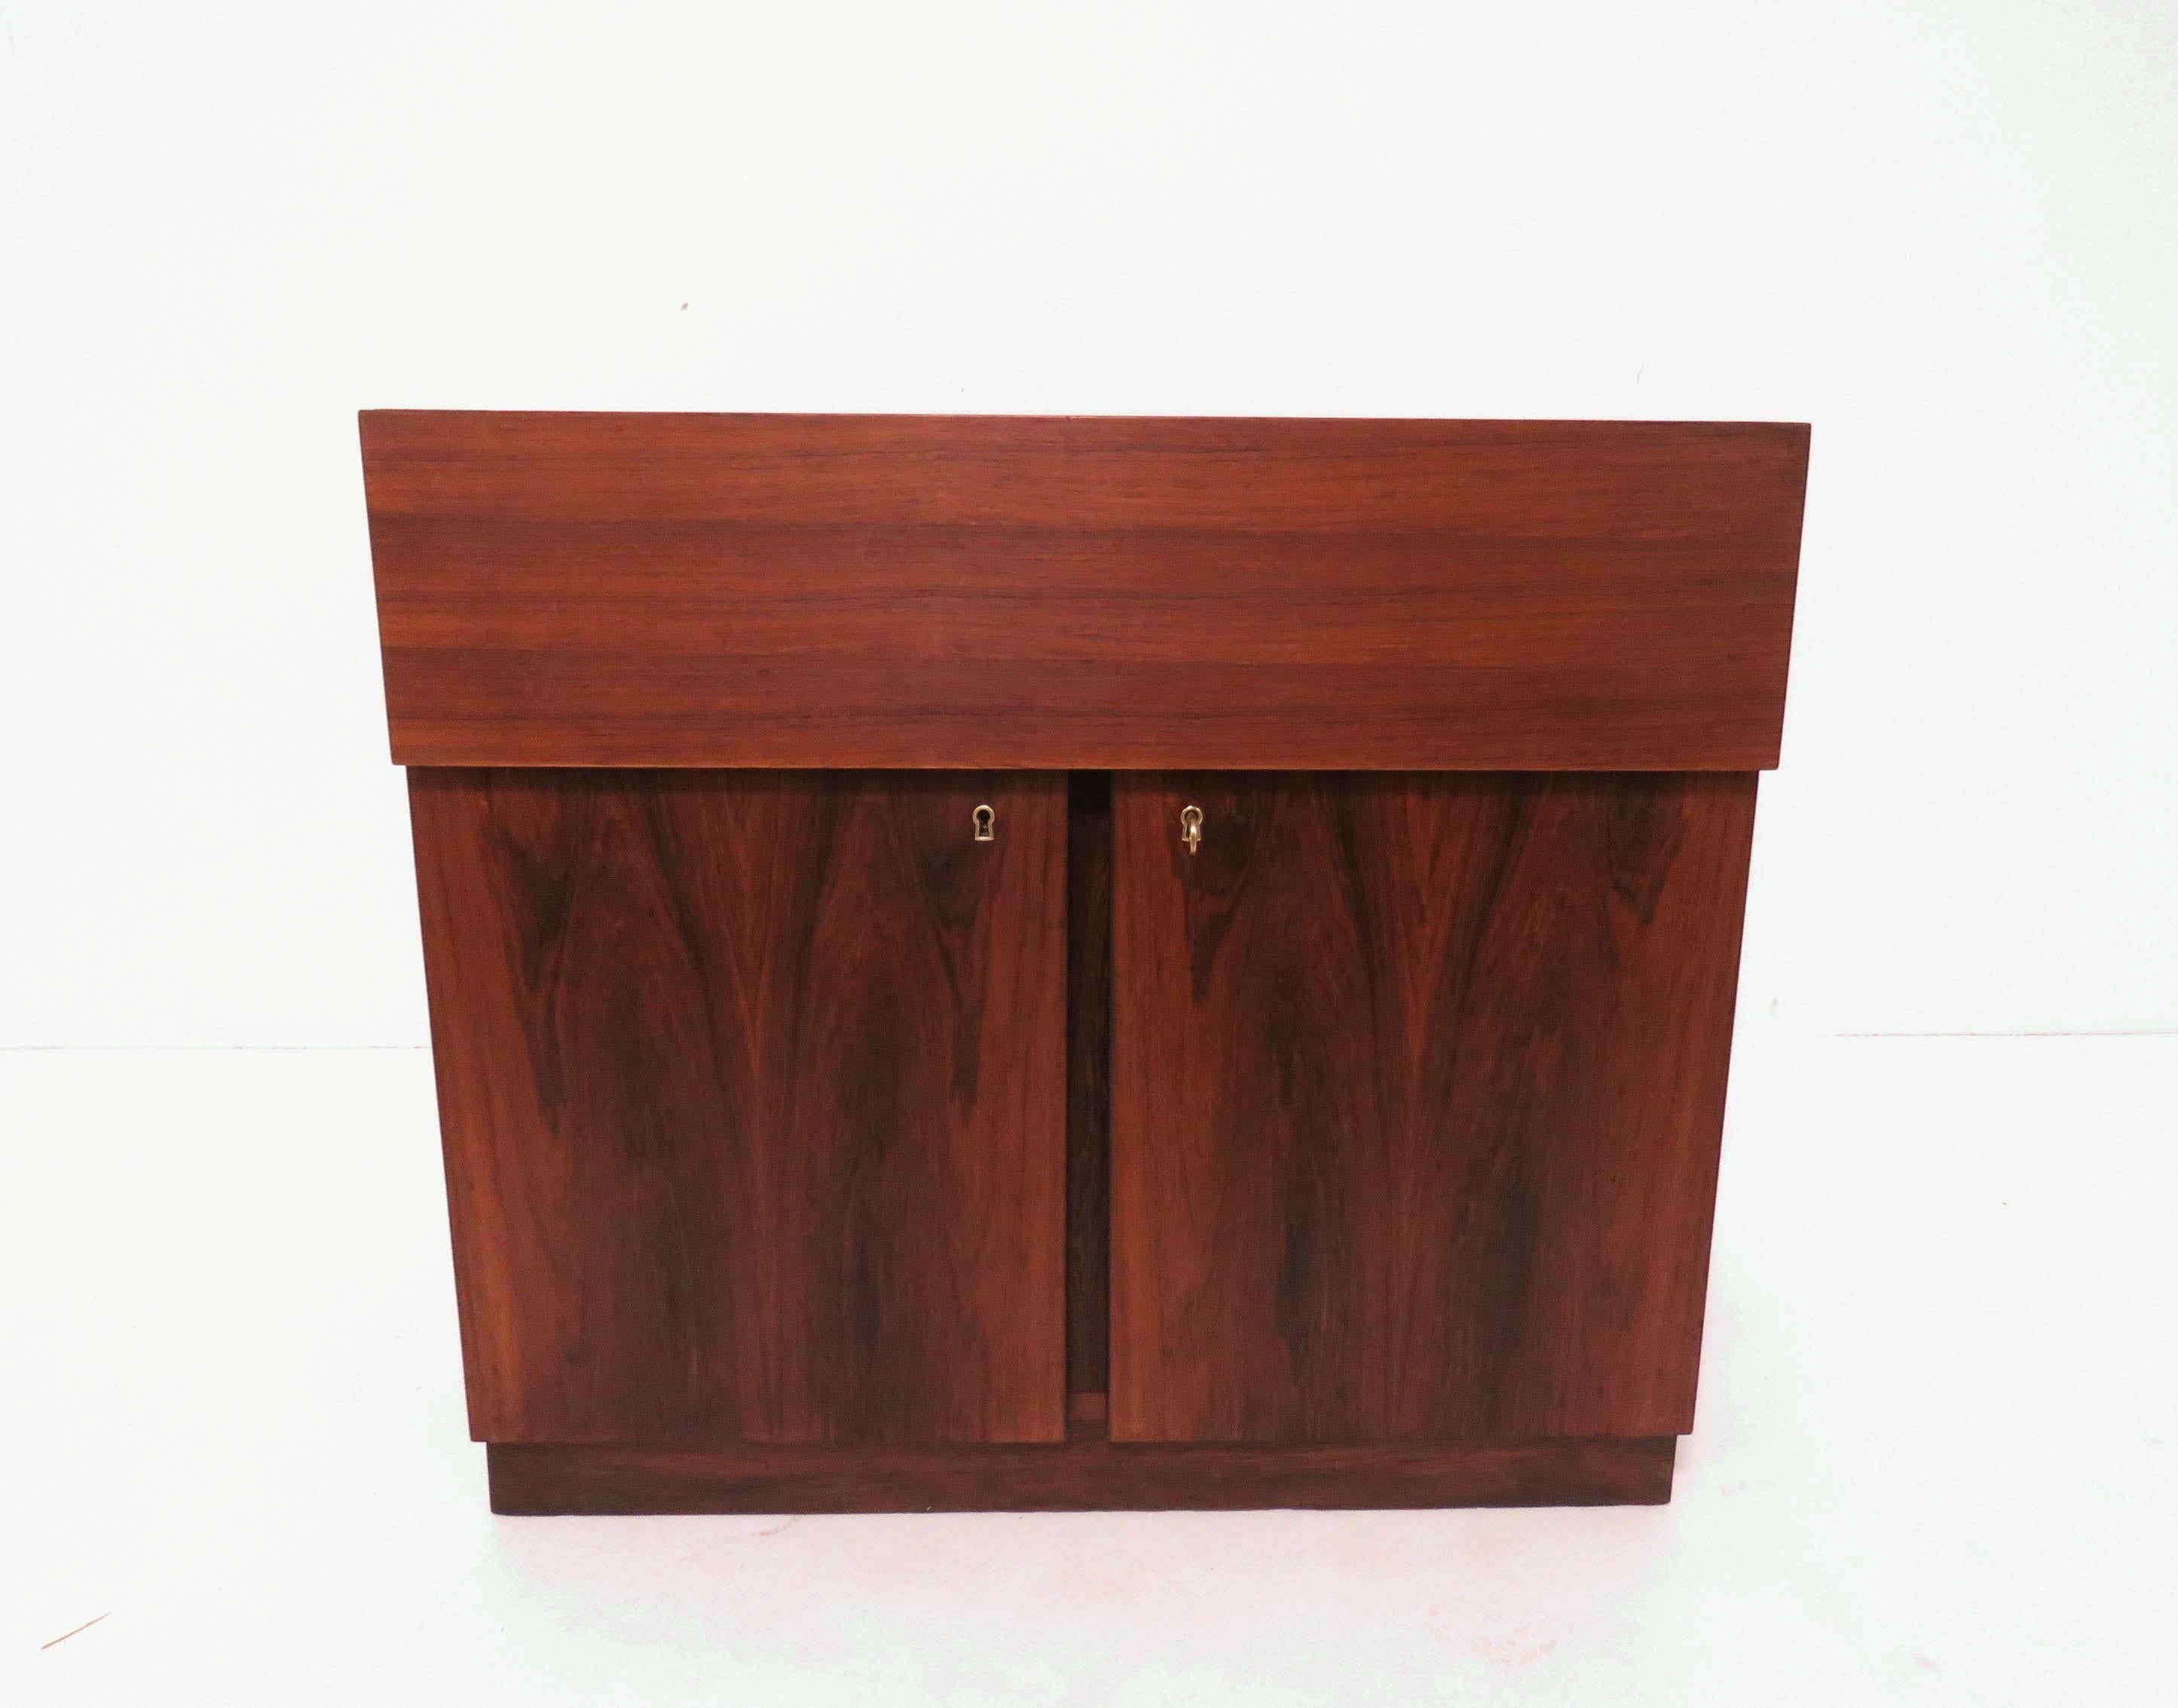 Danish rosewood dry bar cabinet, top opens to reveal laminated surfaces for serving drinks, locked cabinet below. When closed, this measures 31